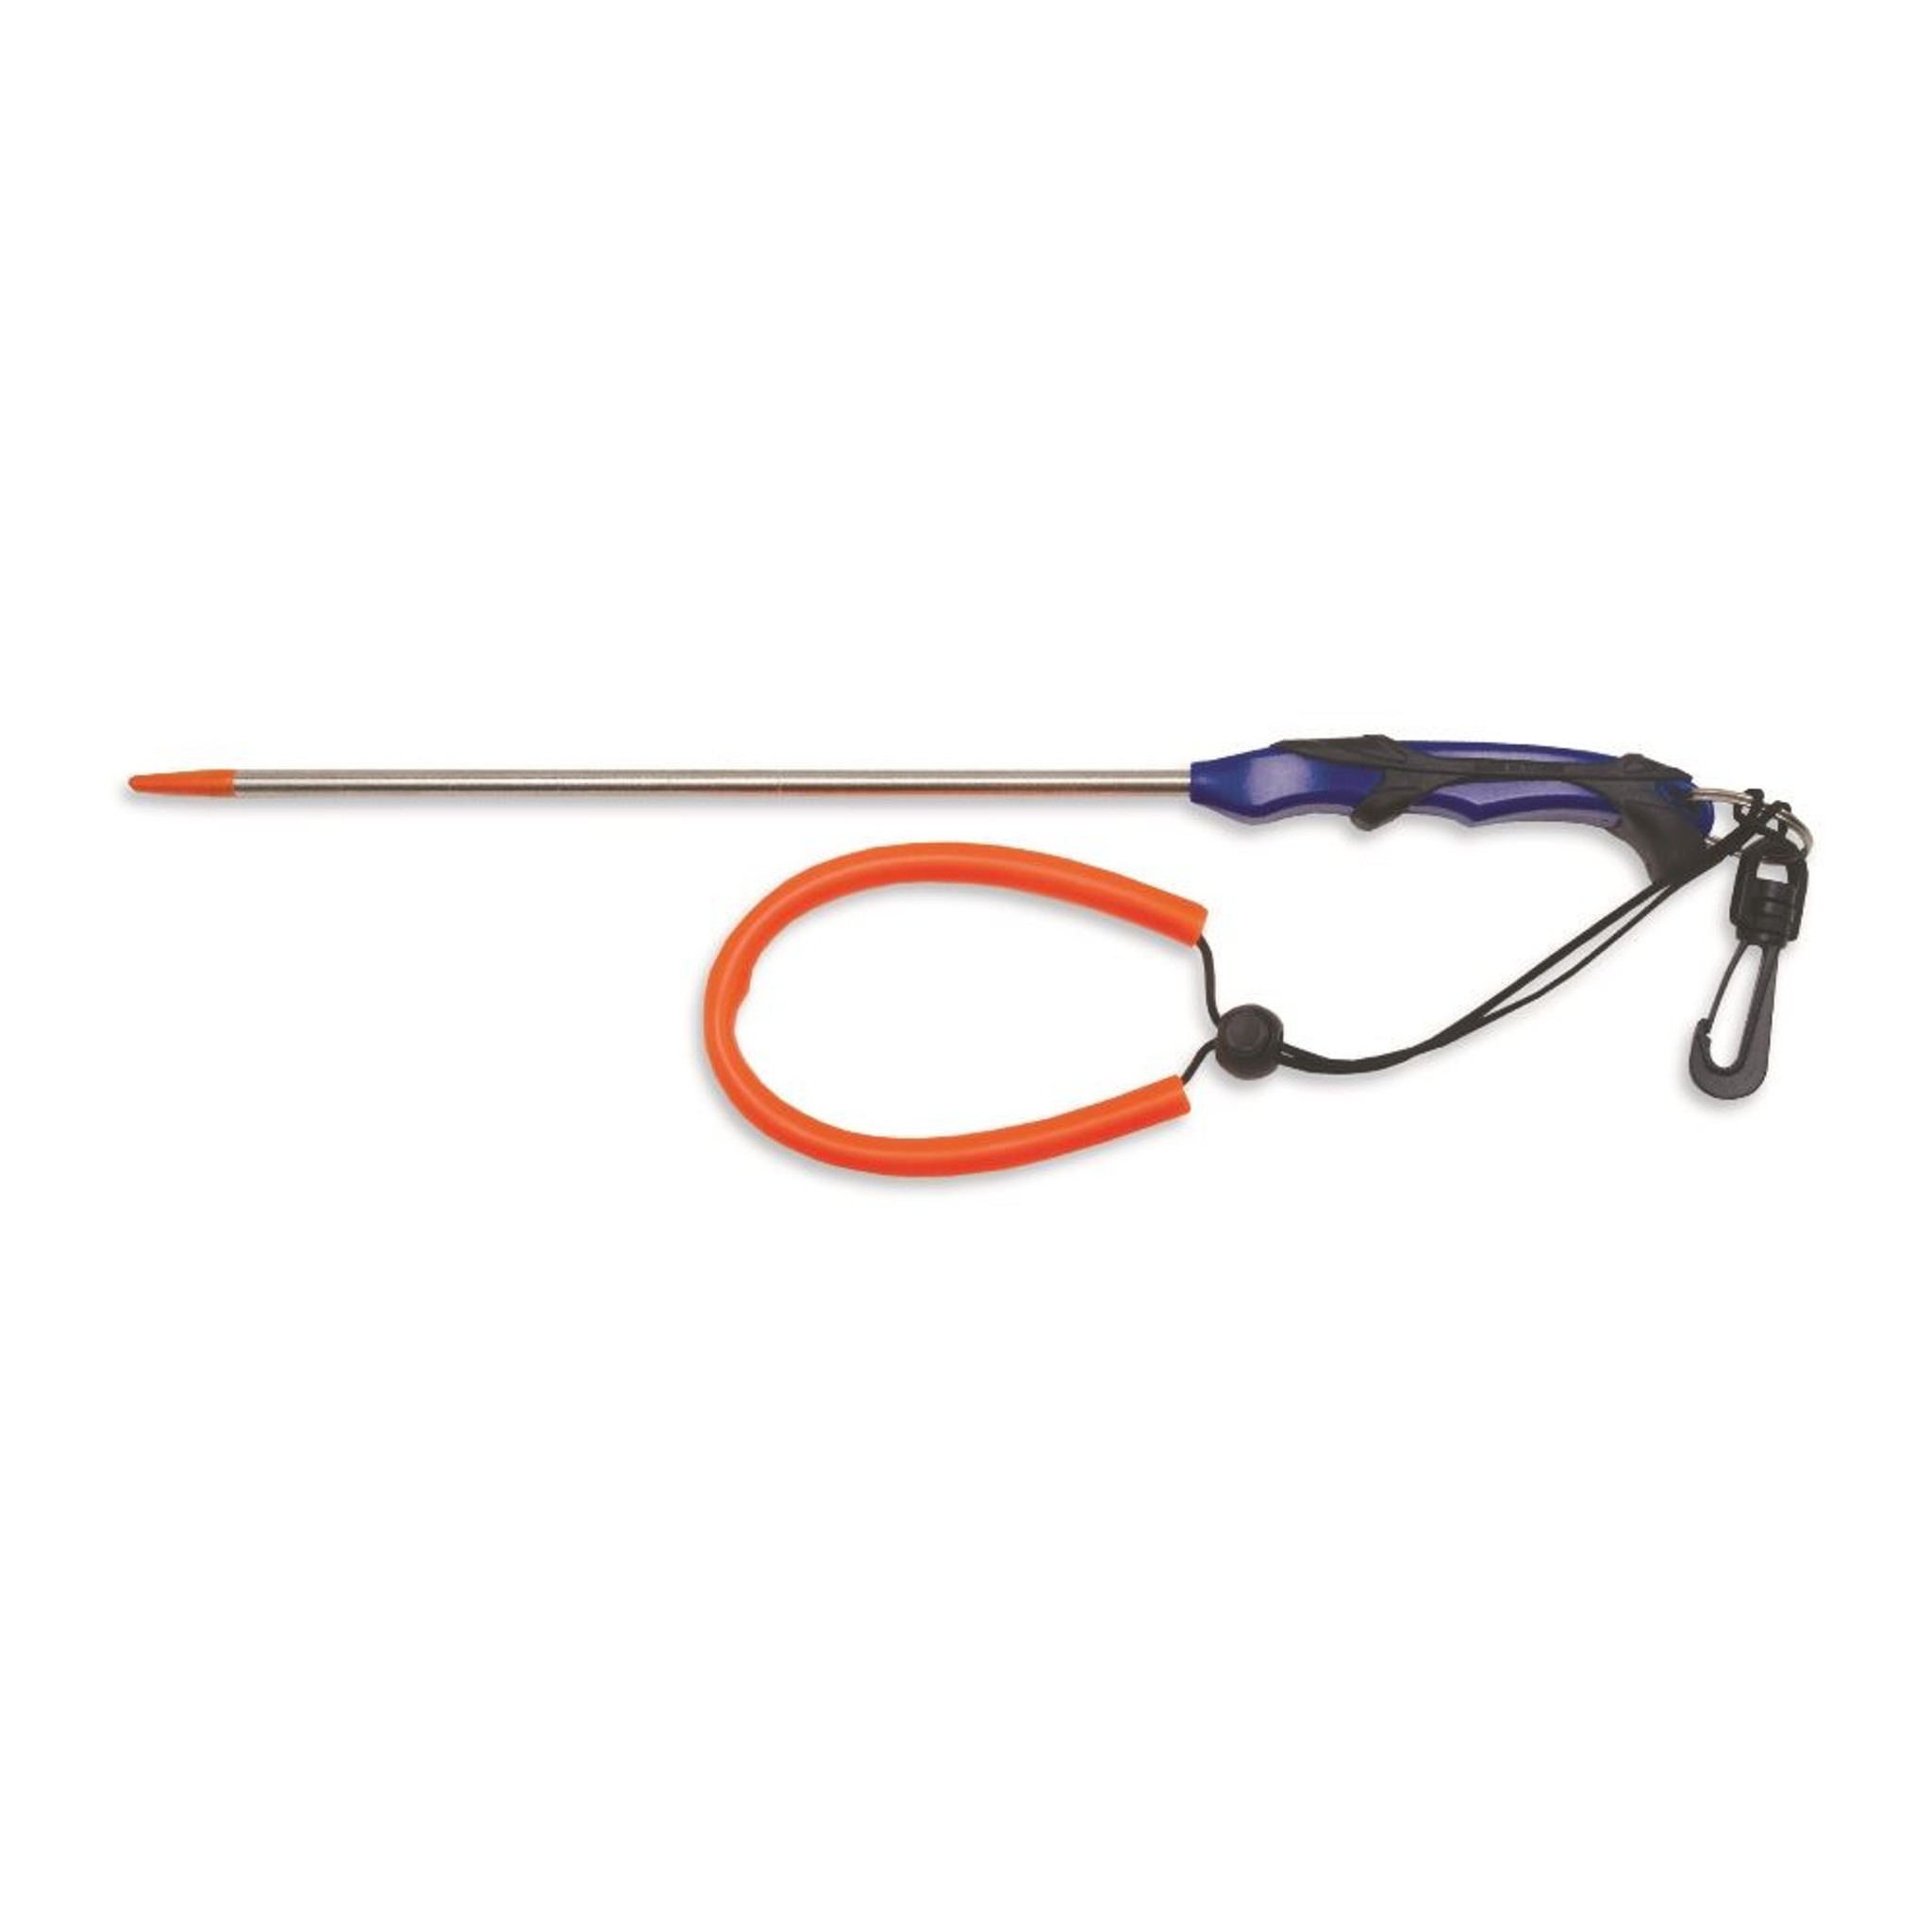 Stainless Steel Pointer/Tickle Stick Dive Scuba w/ Handle - Coral